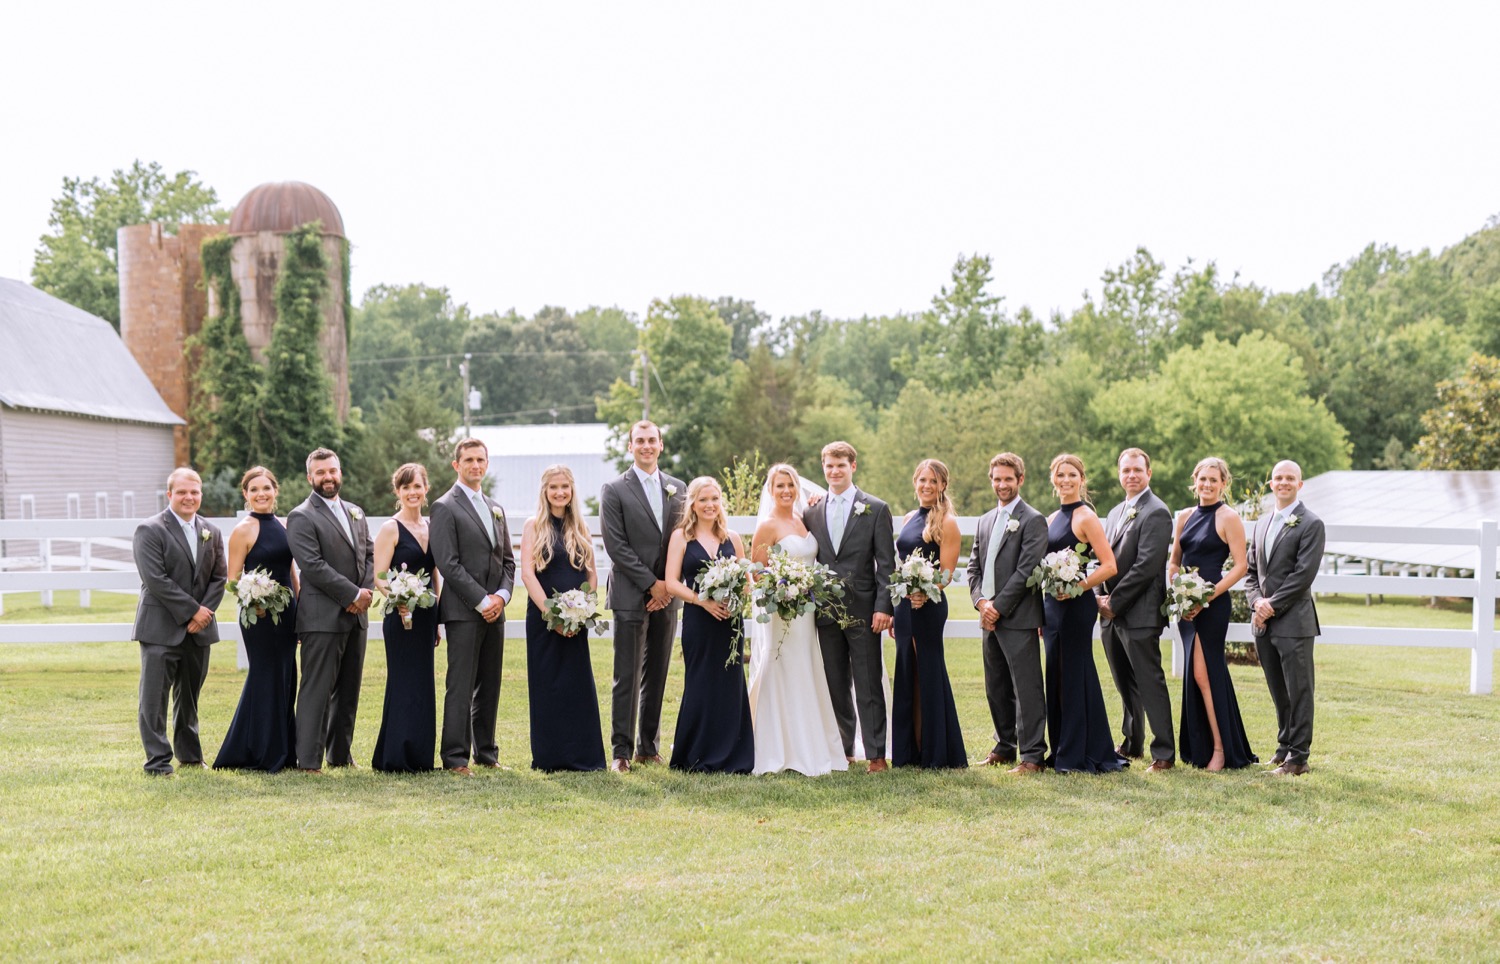 Entire wedding party celebrating with bride and groom after taking their vows at their wedding in Richmond, Virginia